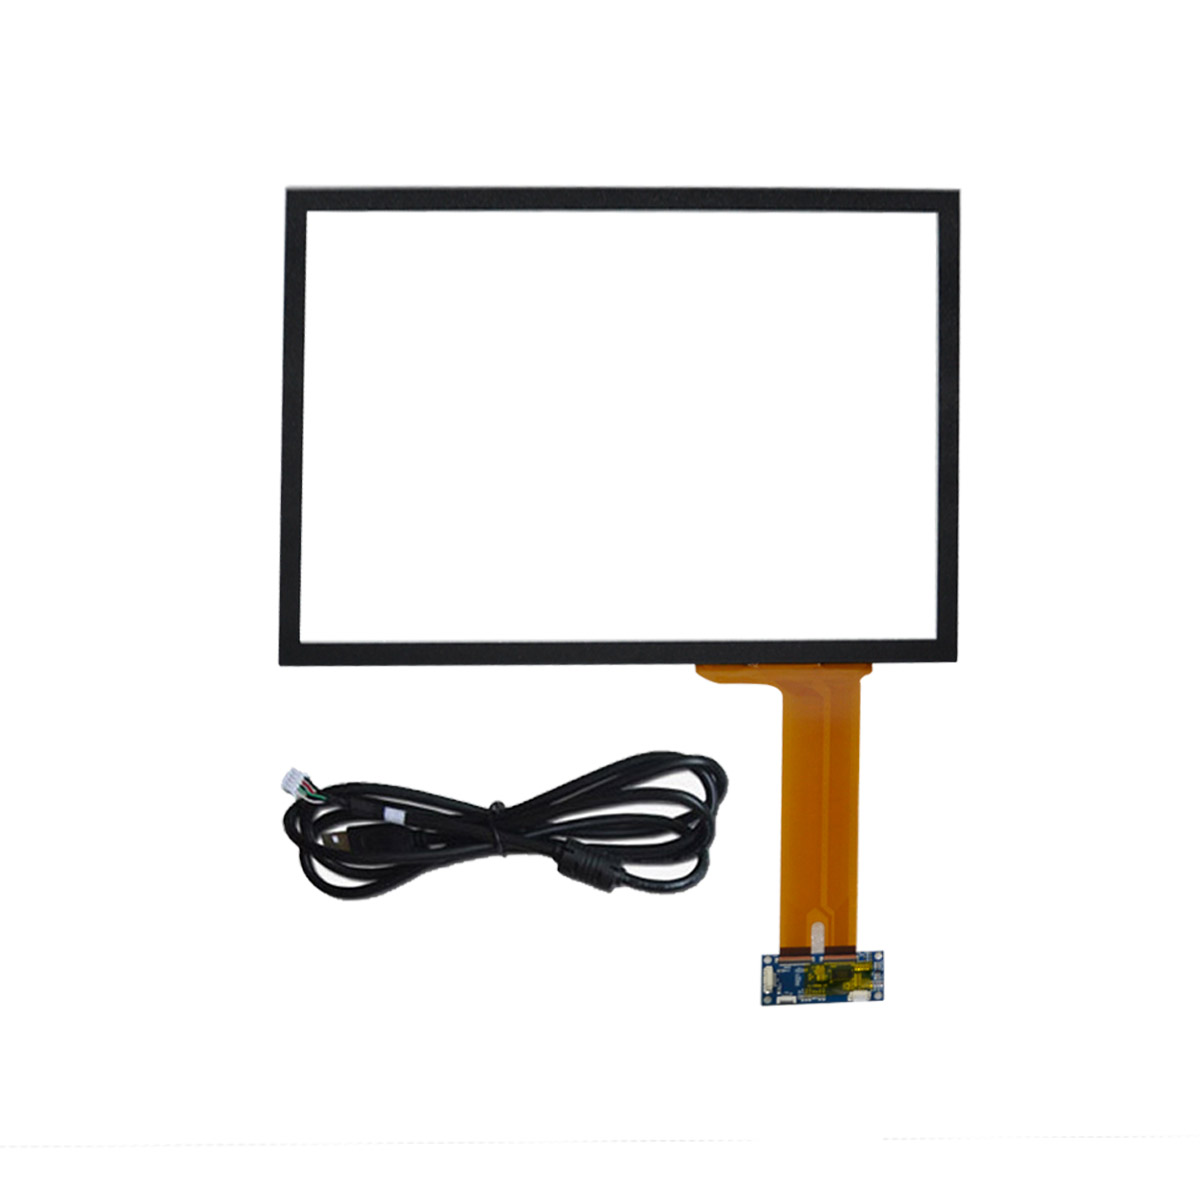 15 inch Projected Capacitive touch screens PCAP/PCT EETI/ilitek Controller